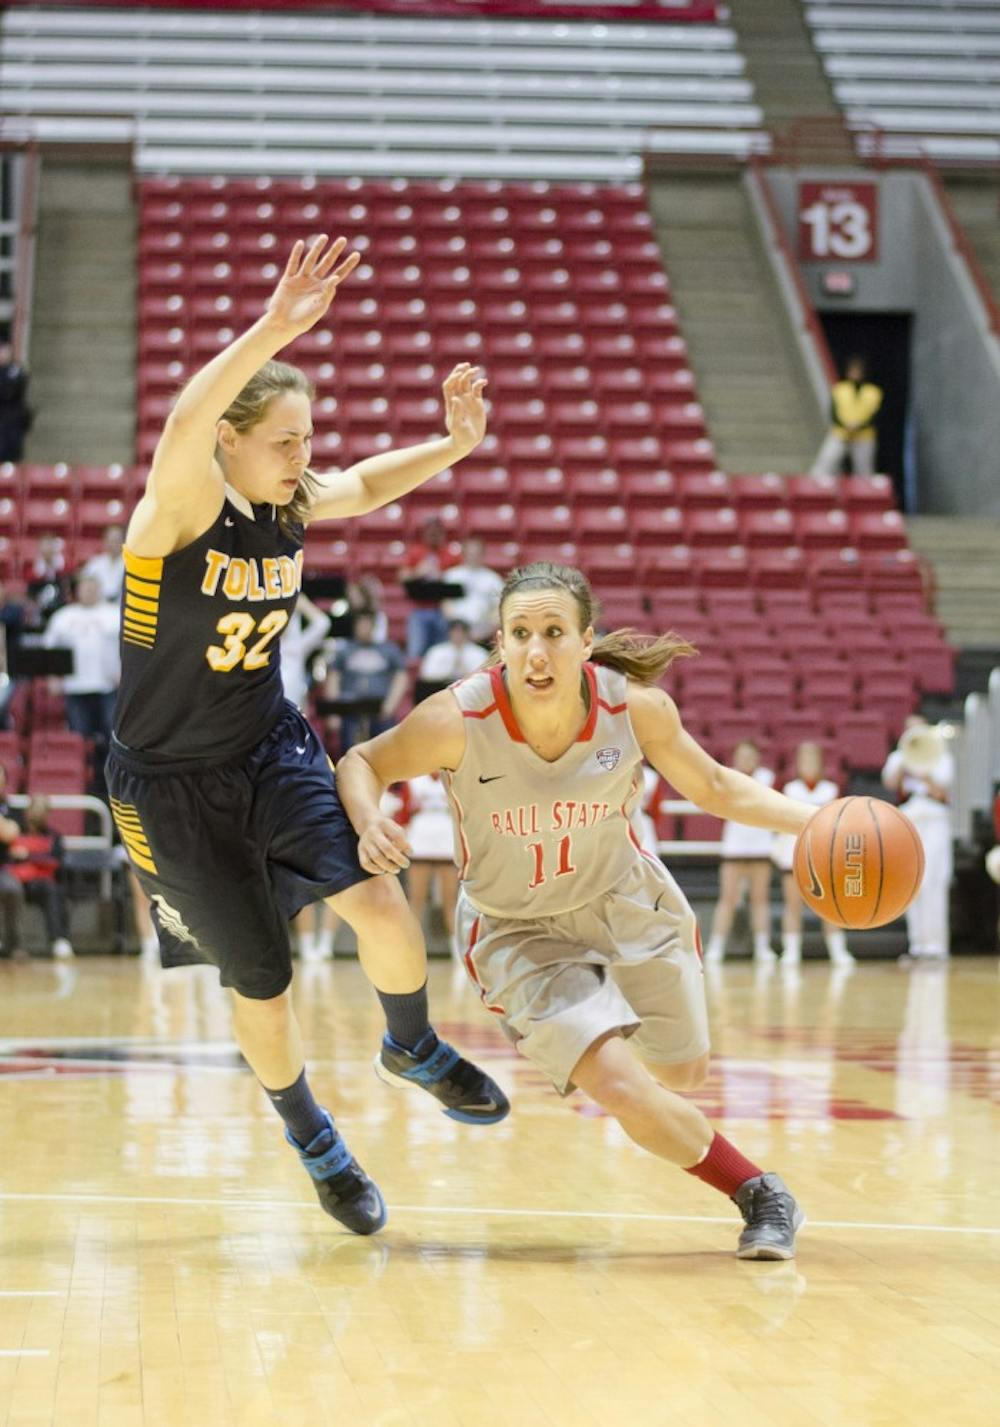 Senior guard Brandy Woody drives the ball past a Toledo player in the second half March 8 at Worthen Arena. Woody scored 11 points in the game. DN PHOTO BREANNA DAUGHERTY 